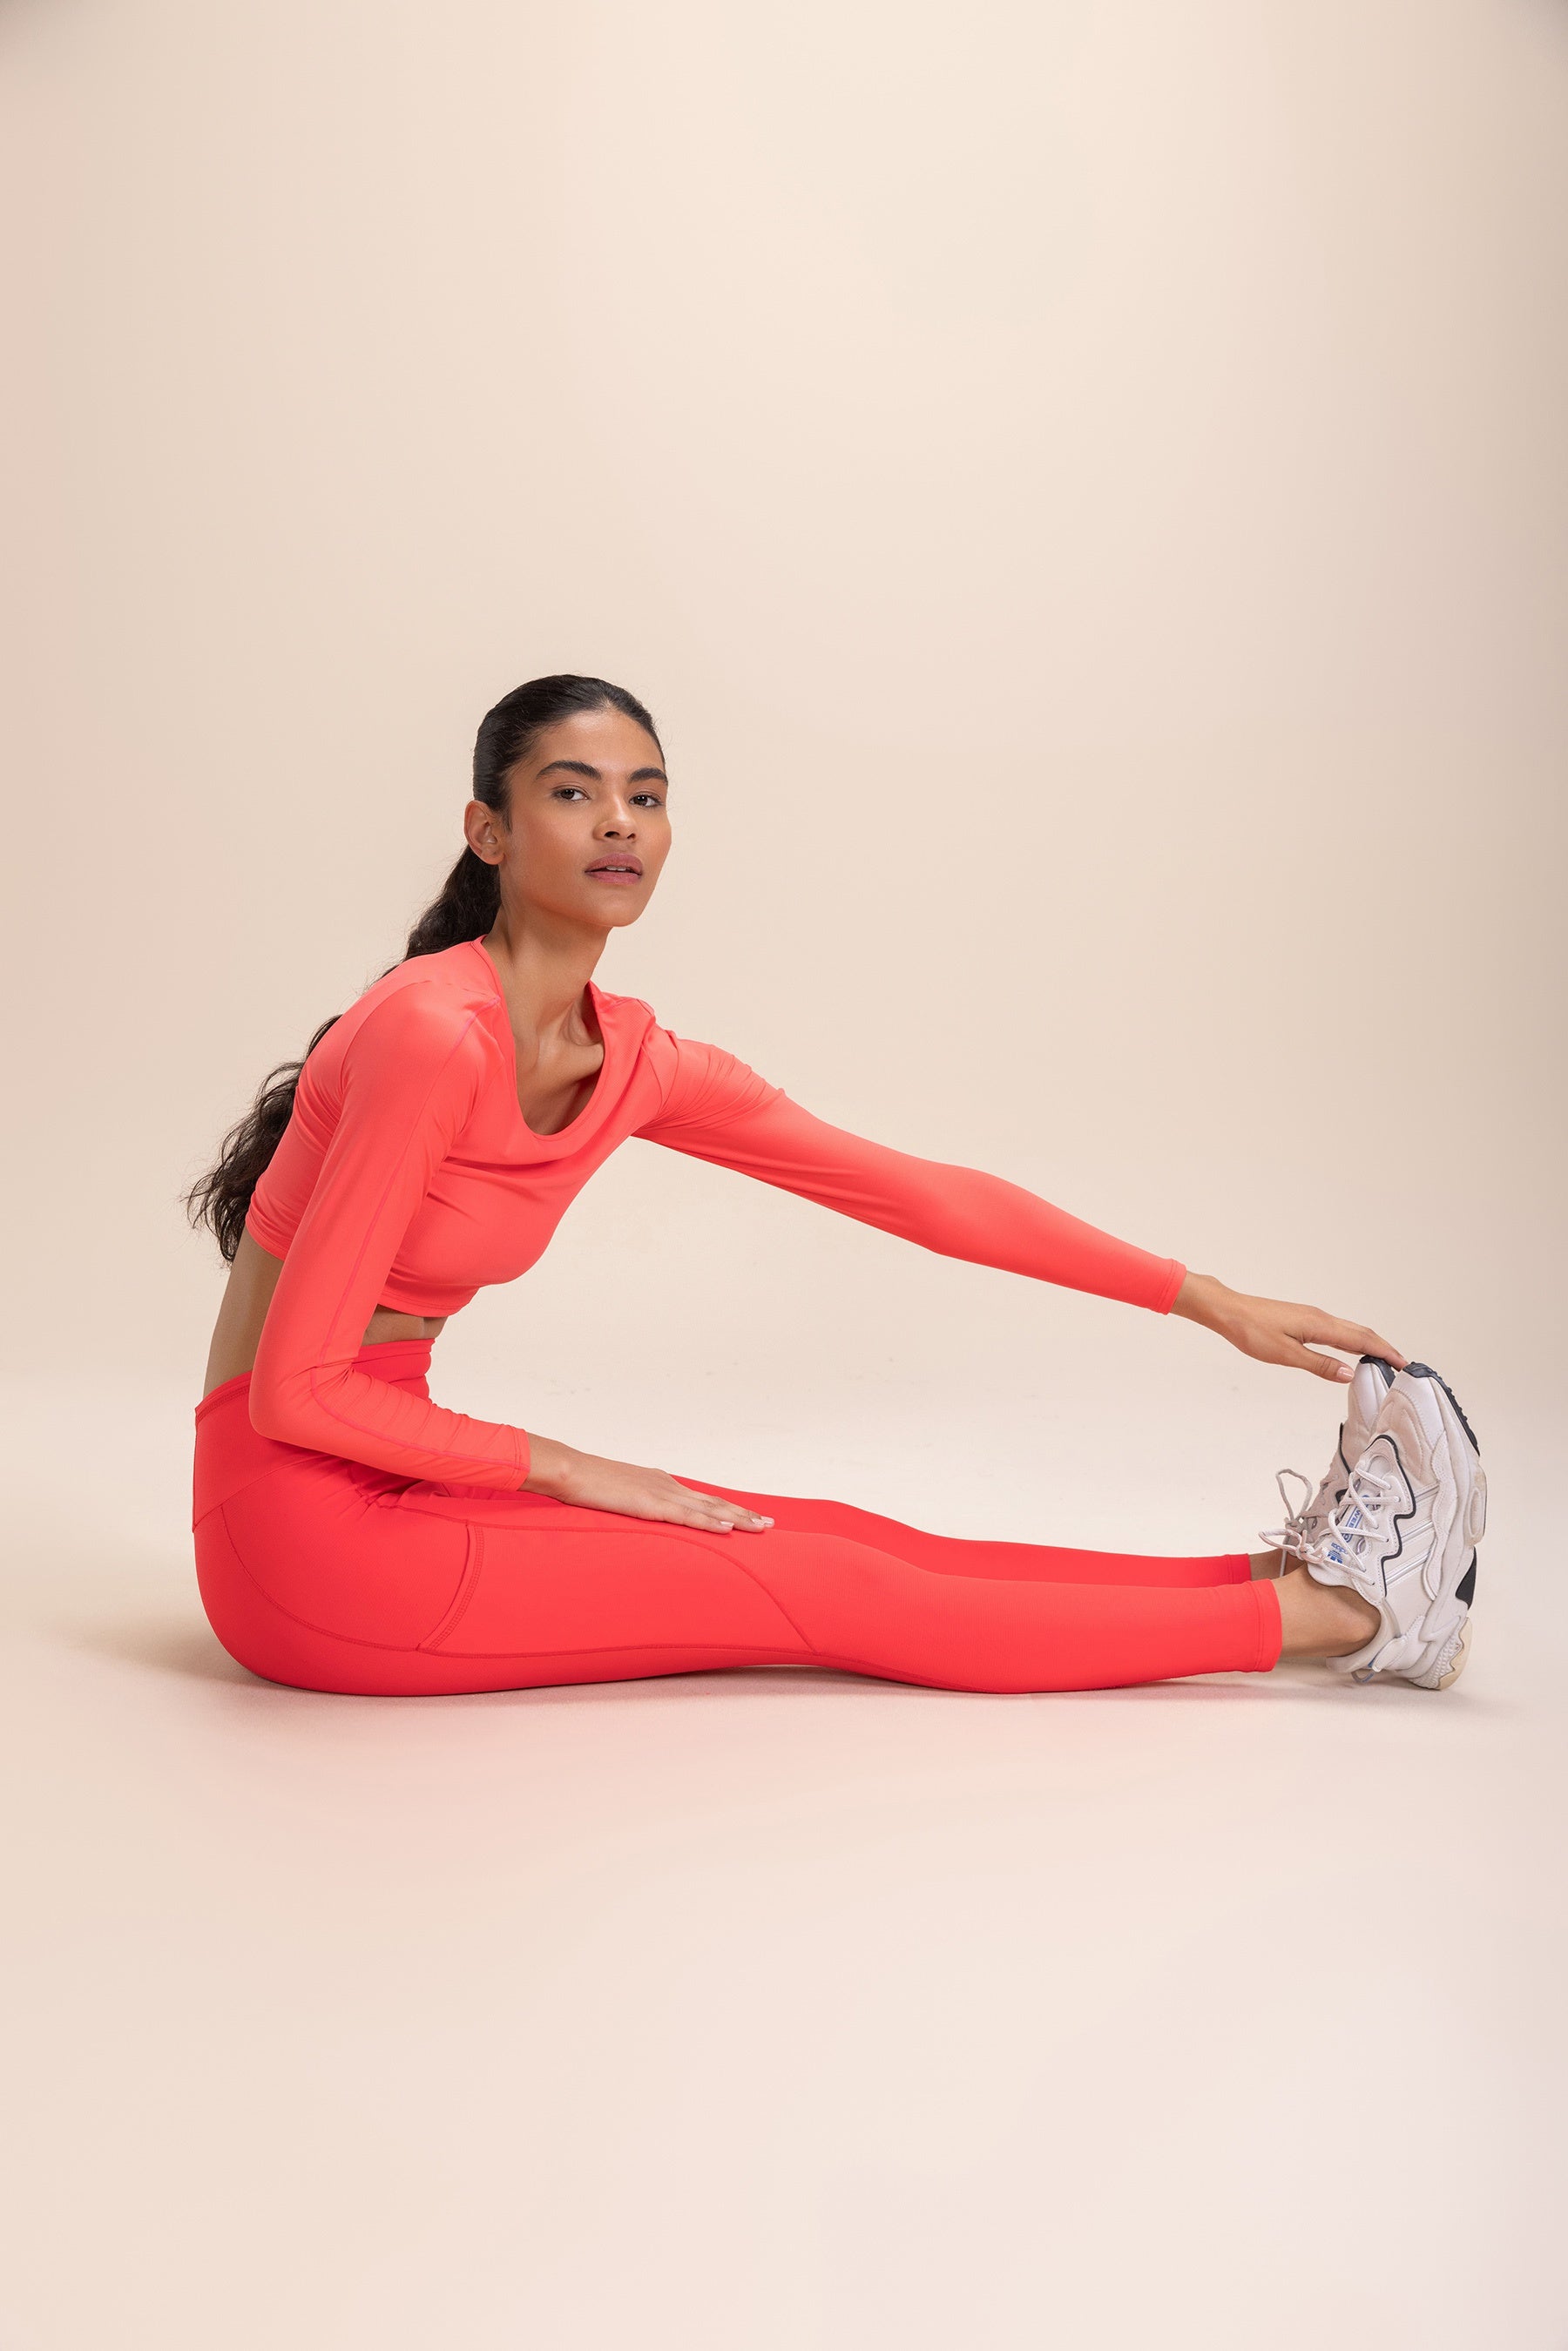 Woman wearing vibrant red Legging 6 Pockets Speed, stretching with one leg extended and holding her sneaker, showcasing the ergonomic design and high-performance fabric.